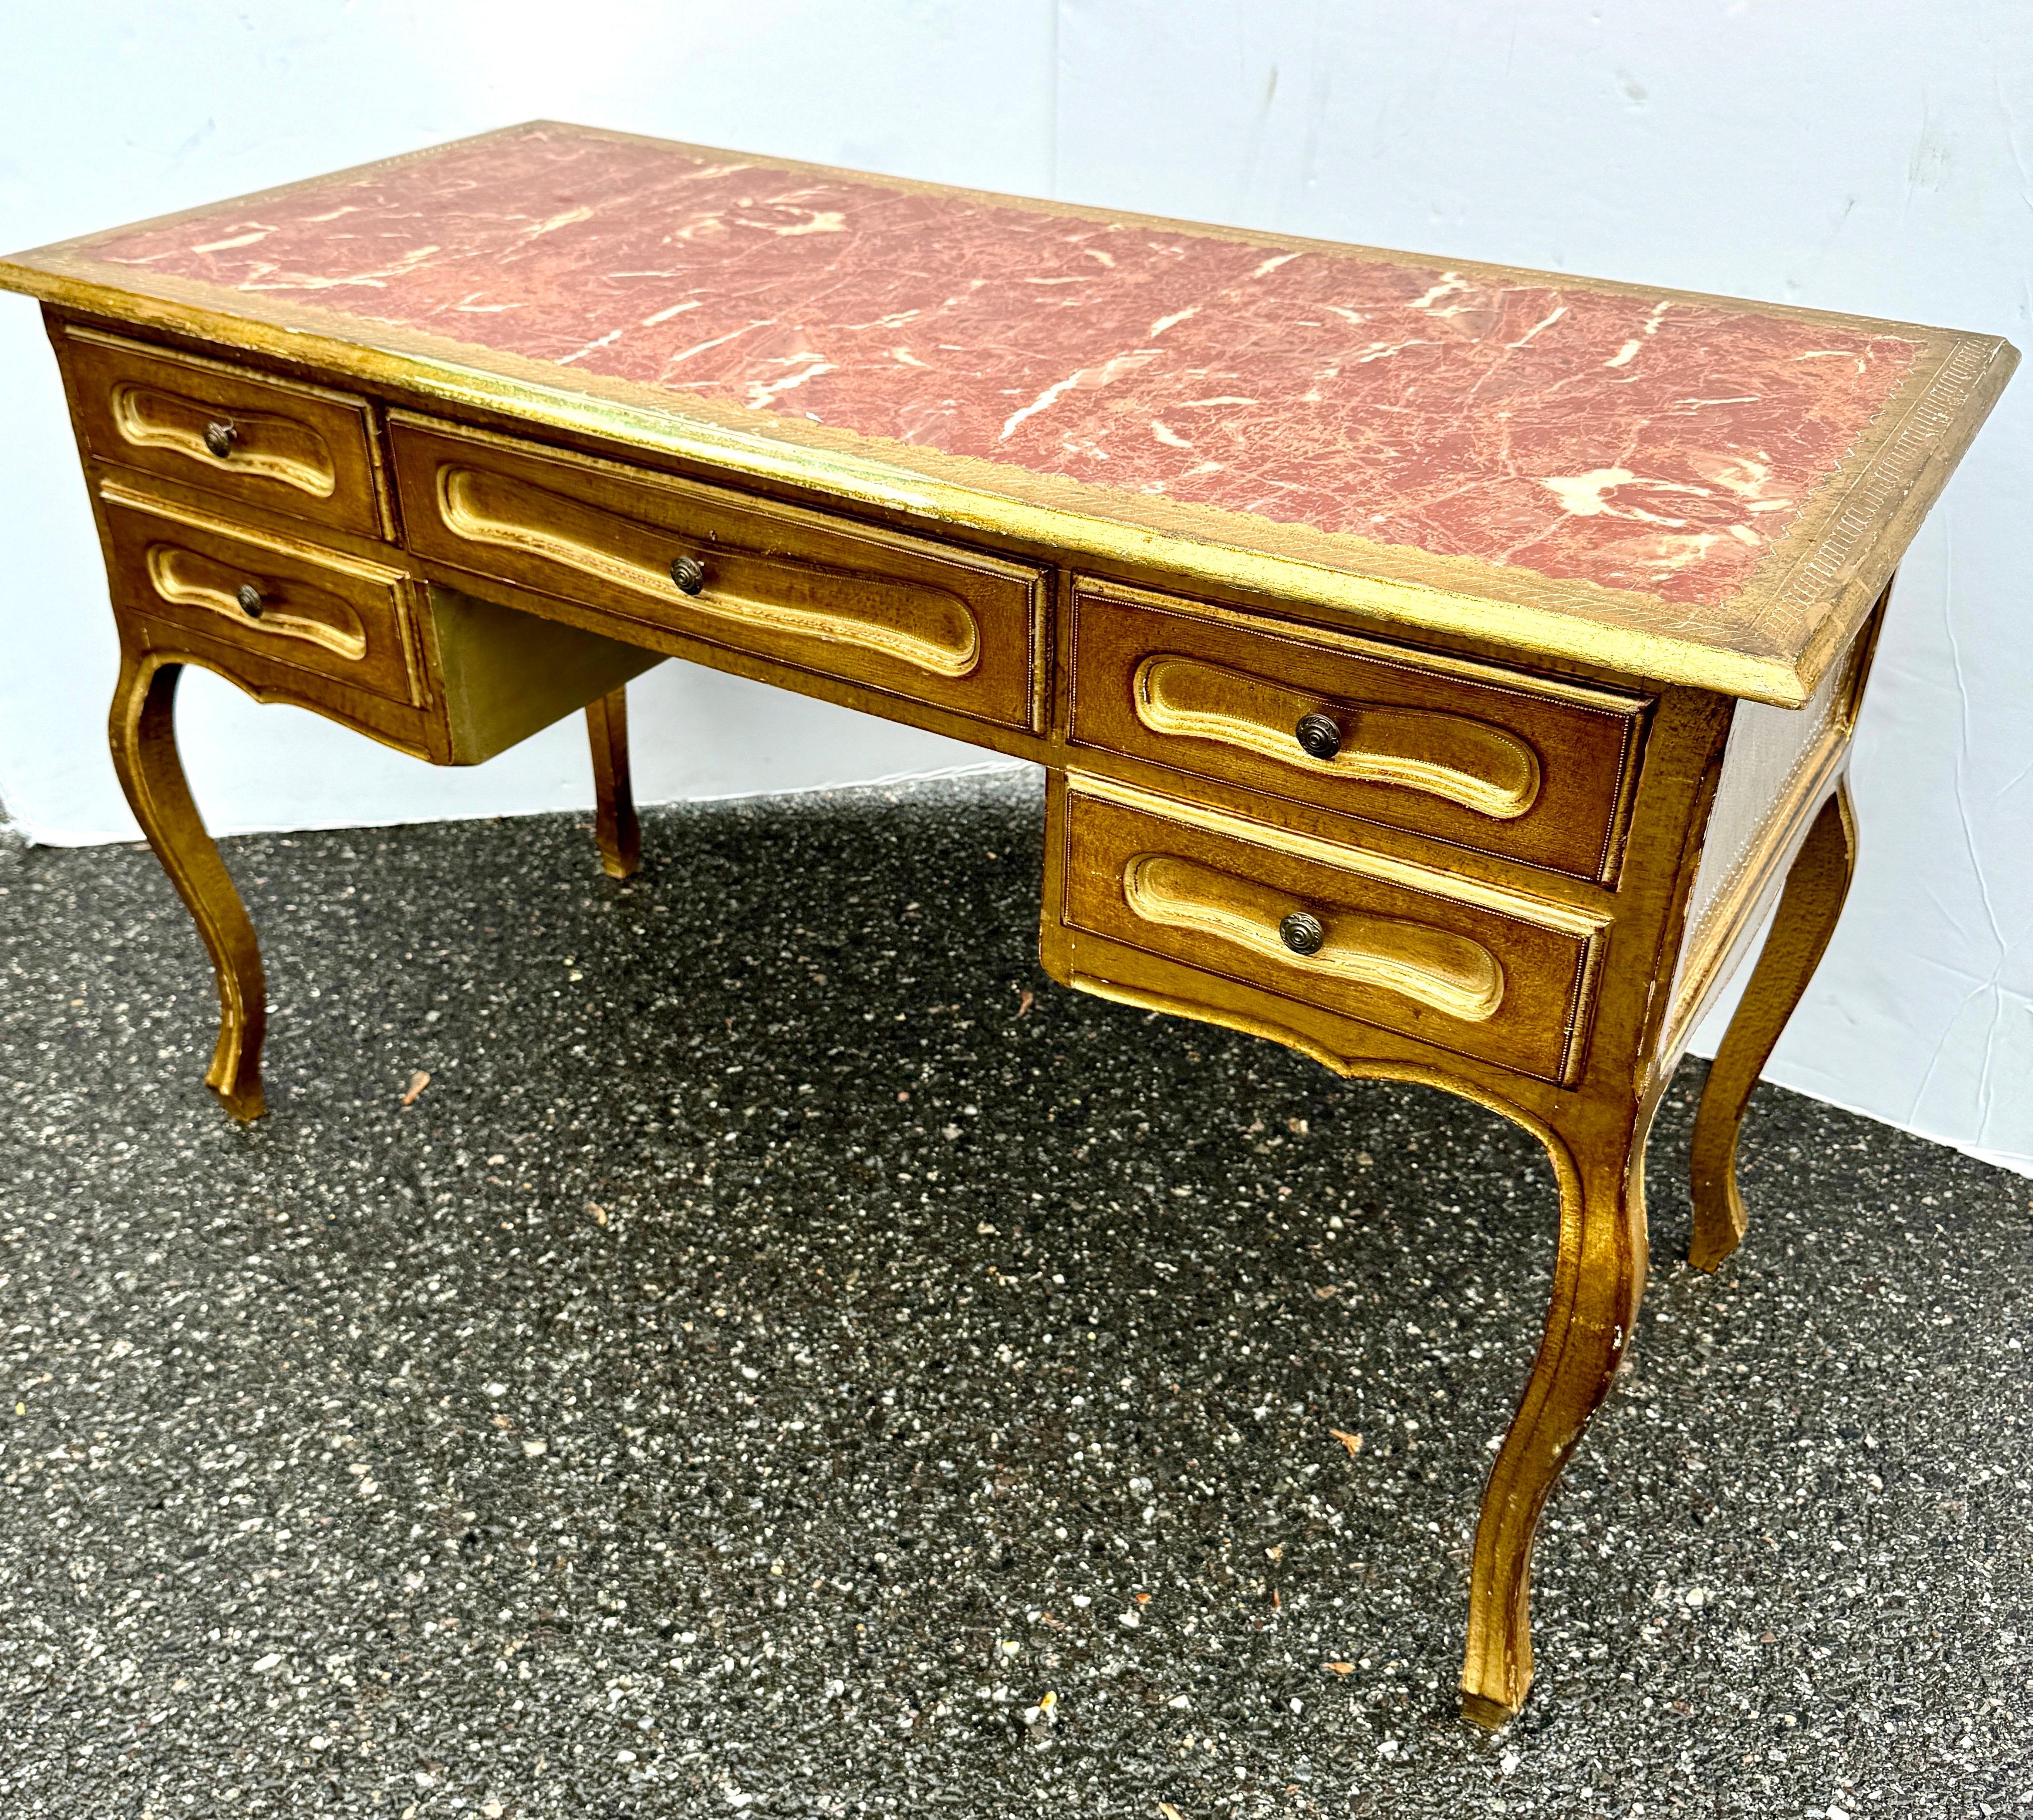 Italian Mid-Century Florentine Gilt Desk with Drawers For Sale 5